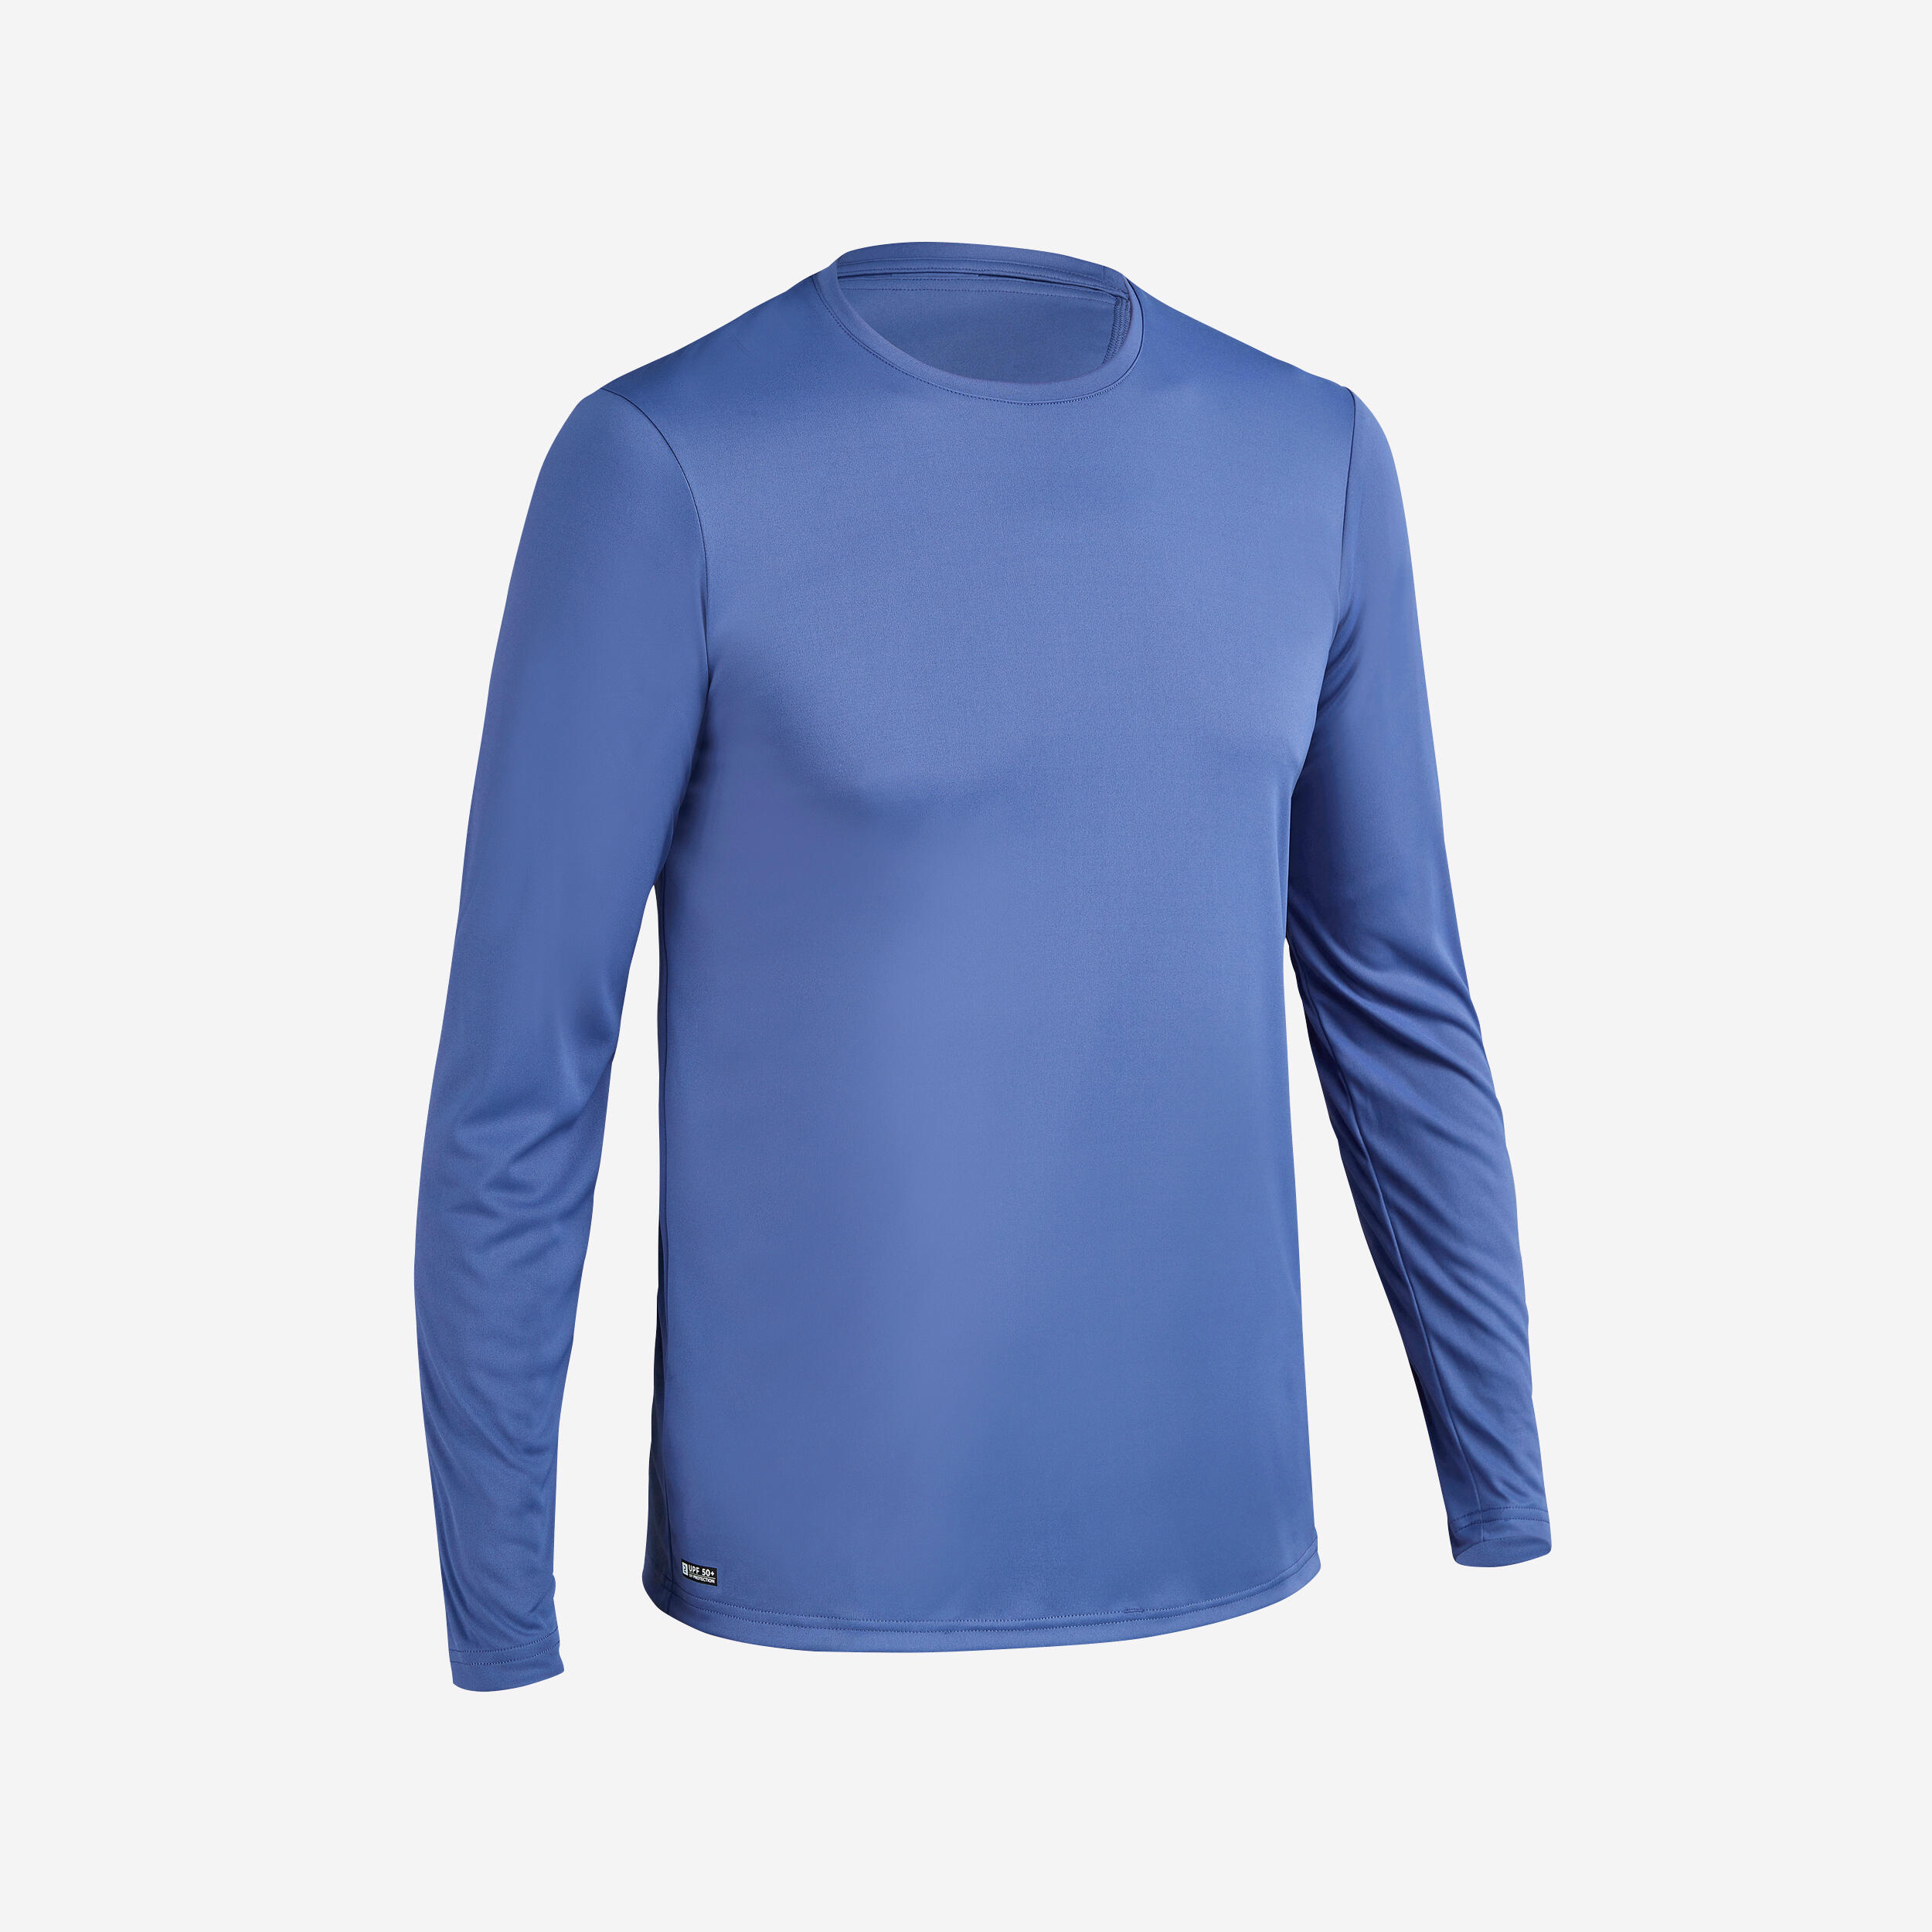 Men's surfing WATER T-SHIRT long sleeve UV-protection top - Blue 1/4